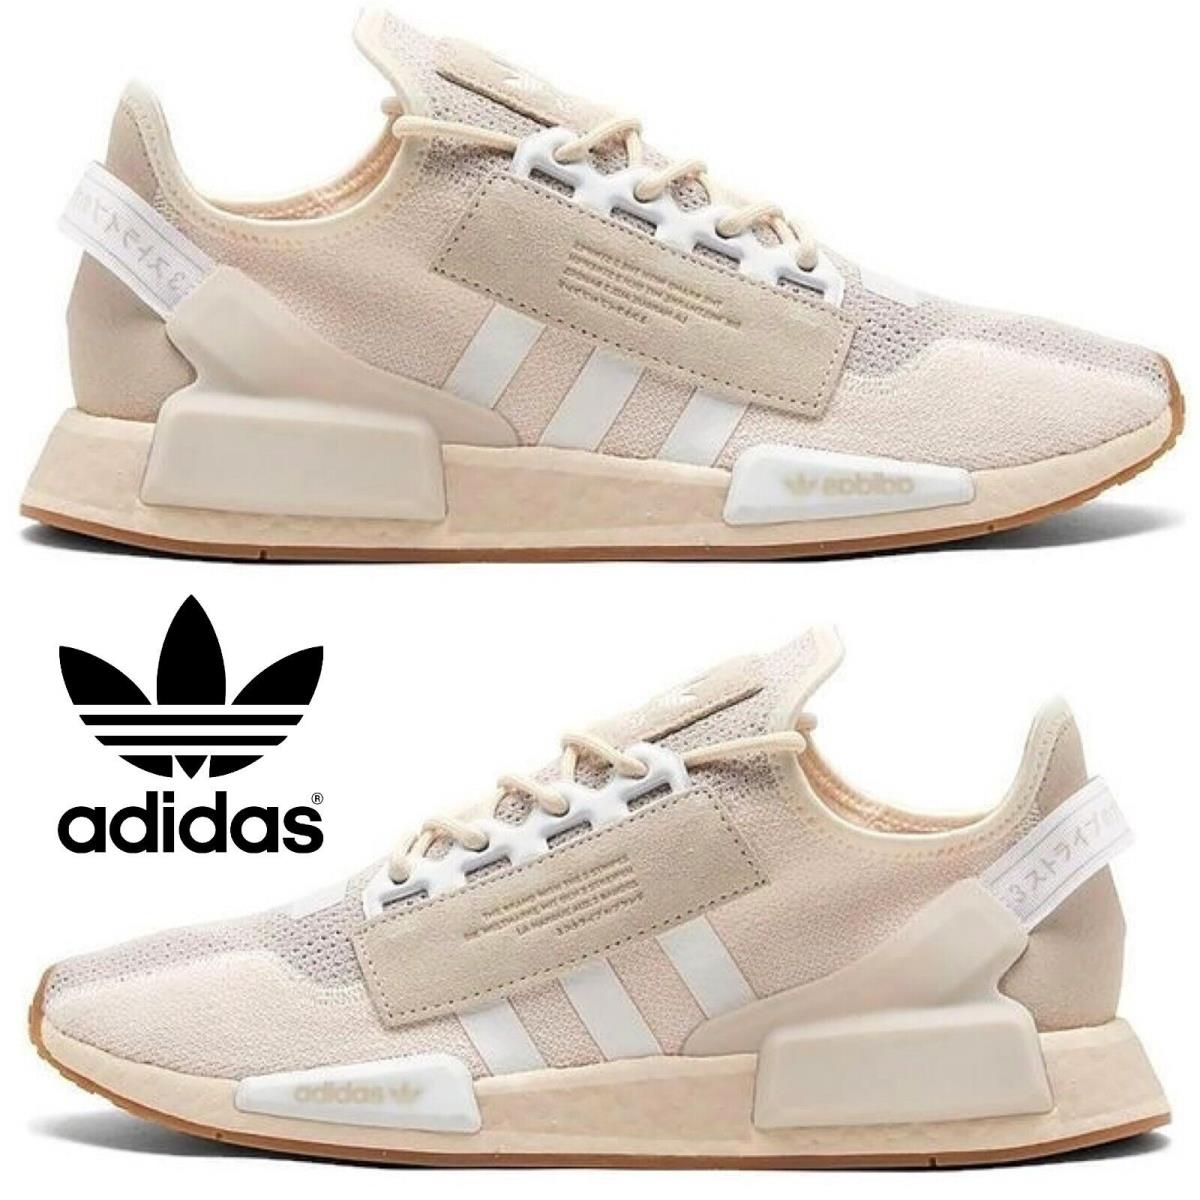 Adidas Originals Nmd R1 Men`s Sneakers Running Shoes Gym Casual Sport Beige